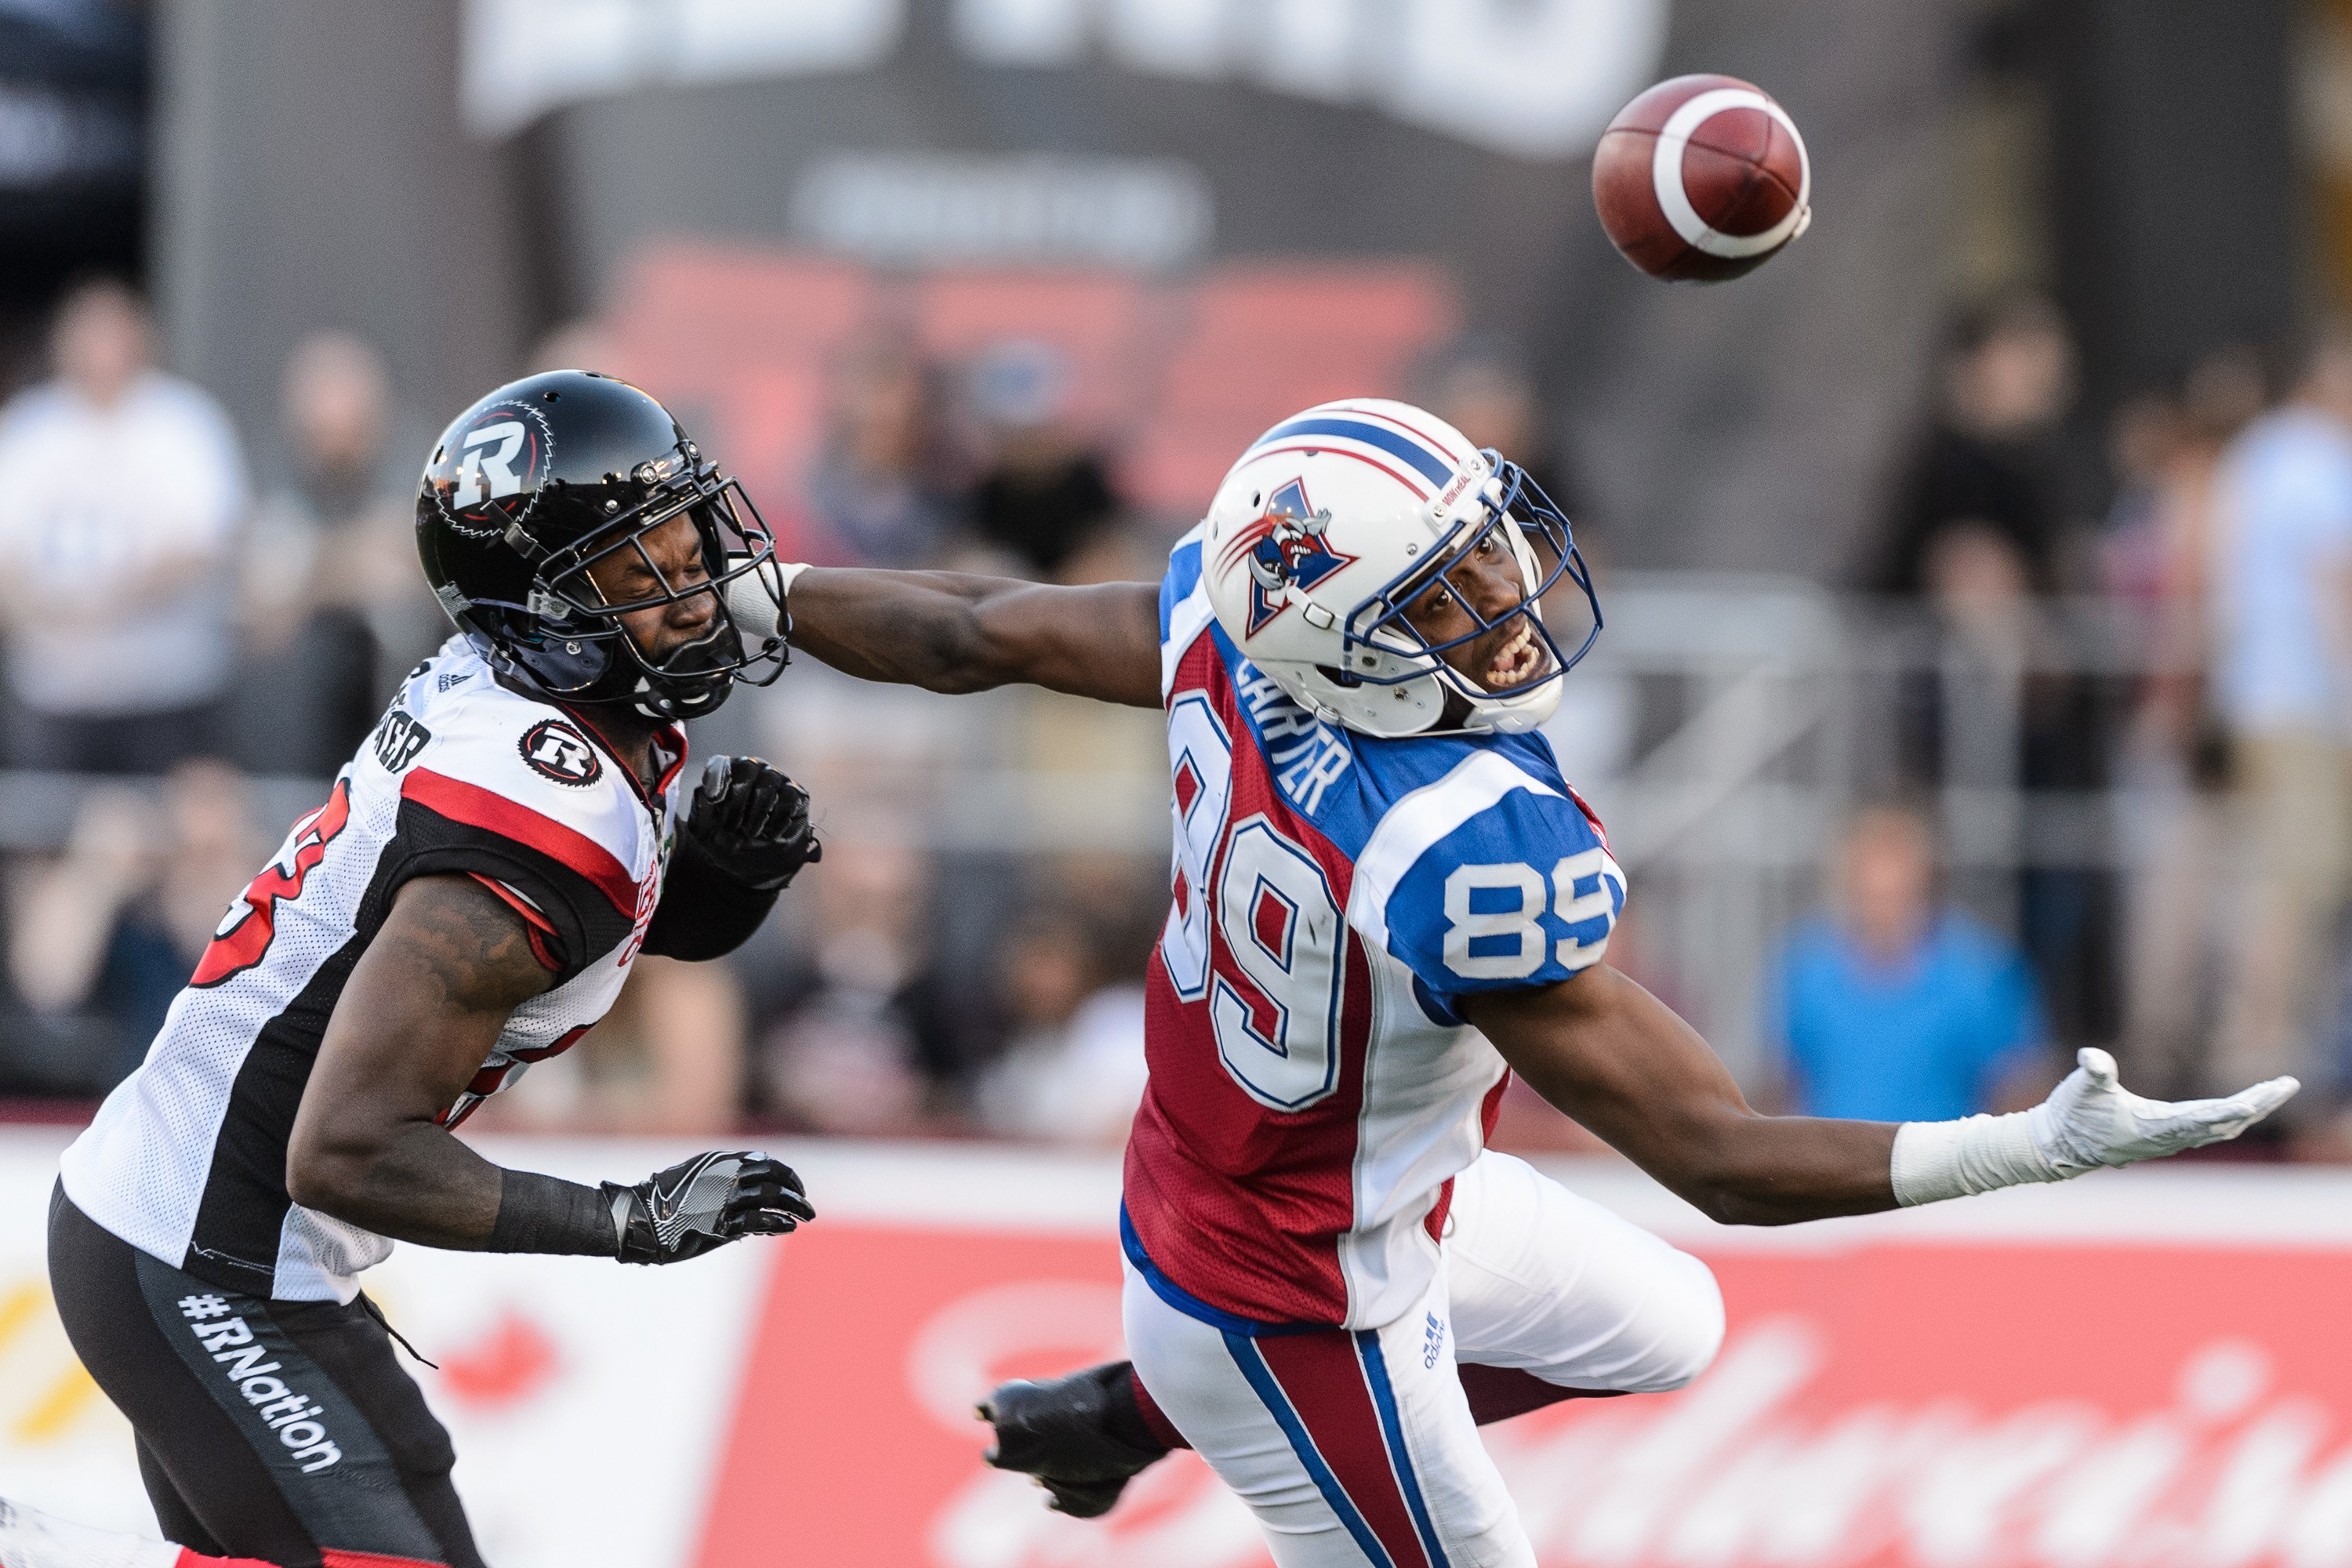 Like father like son, Duron Carter reportedly has been offered a